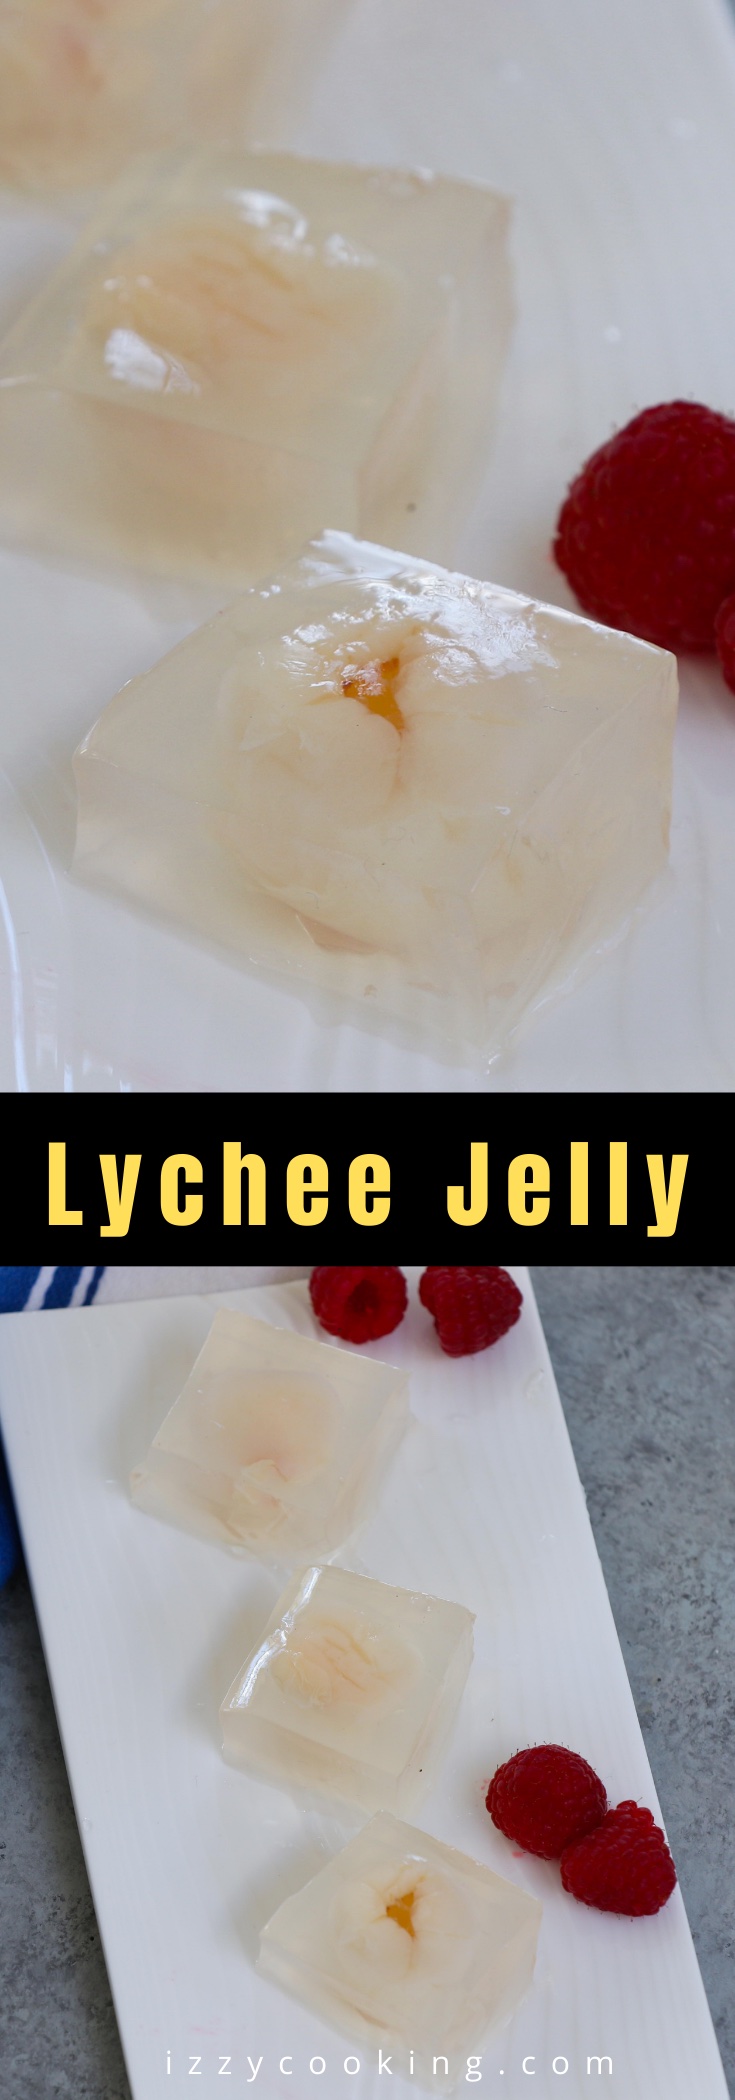 Lychee Jelly is a jiggly Chinese dessert that's made with coconut water, lychee fruits, and agar agar. These delightful vegan sweet cubes are a lovely treat on a hot summer day. You can use gelatin for a non-vegan option. Add it to your iced tea for a fruity alternative to boba bubble tea!